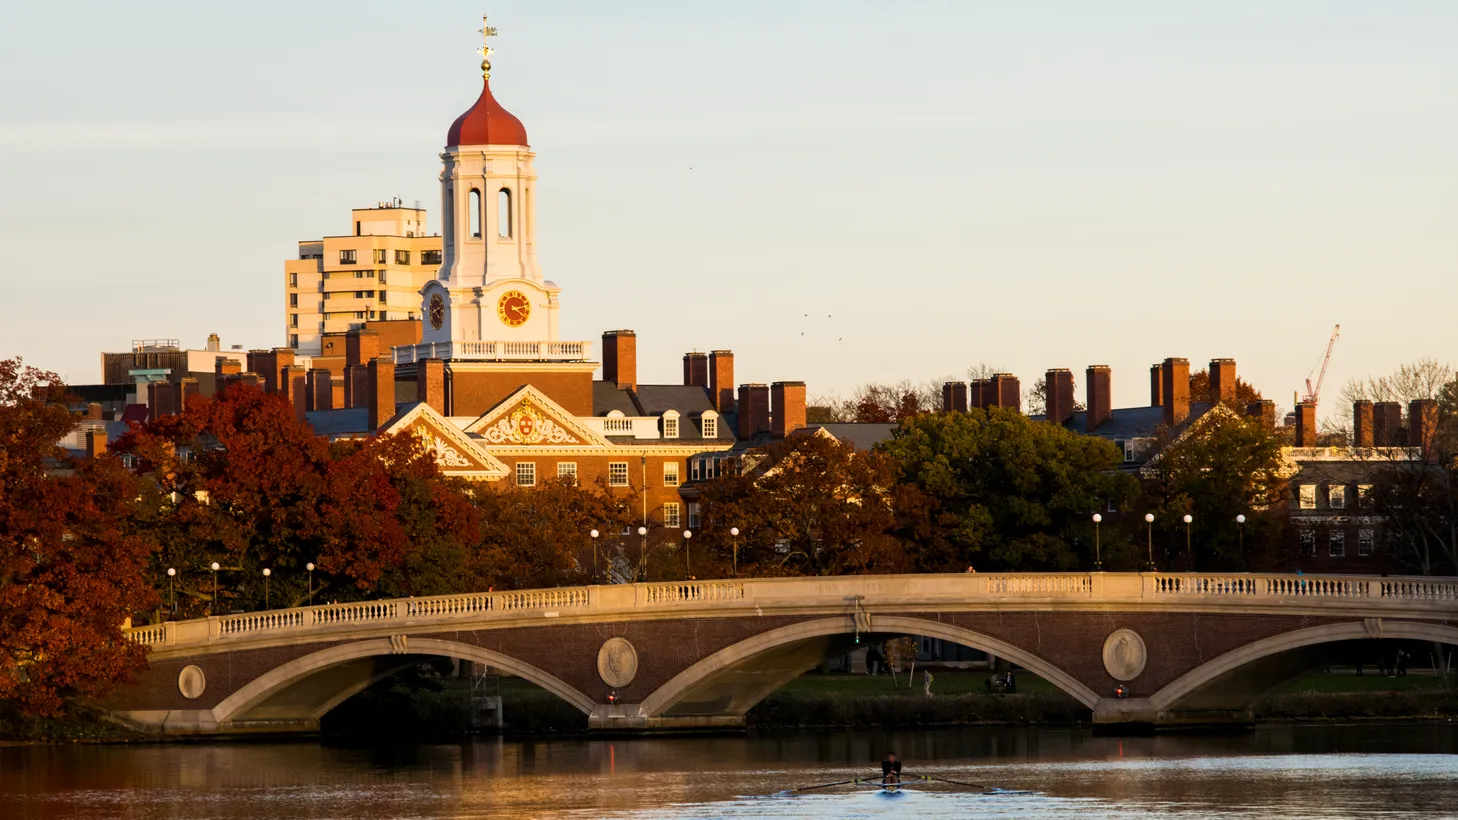 This fall, the Supreme Court will hear challenges to affirmative action at Harvard.